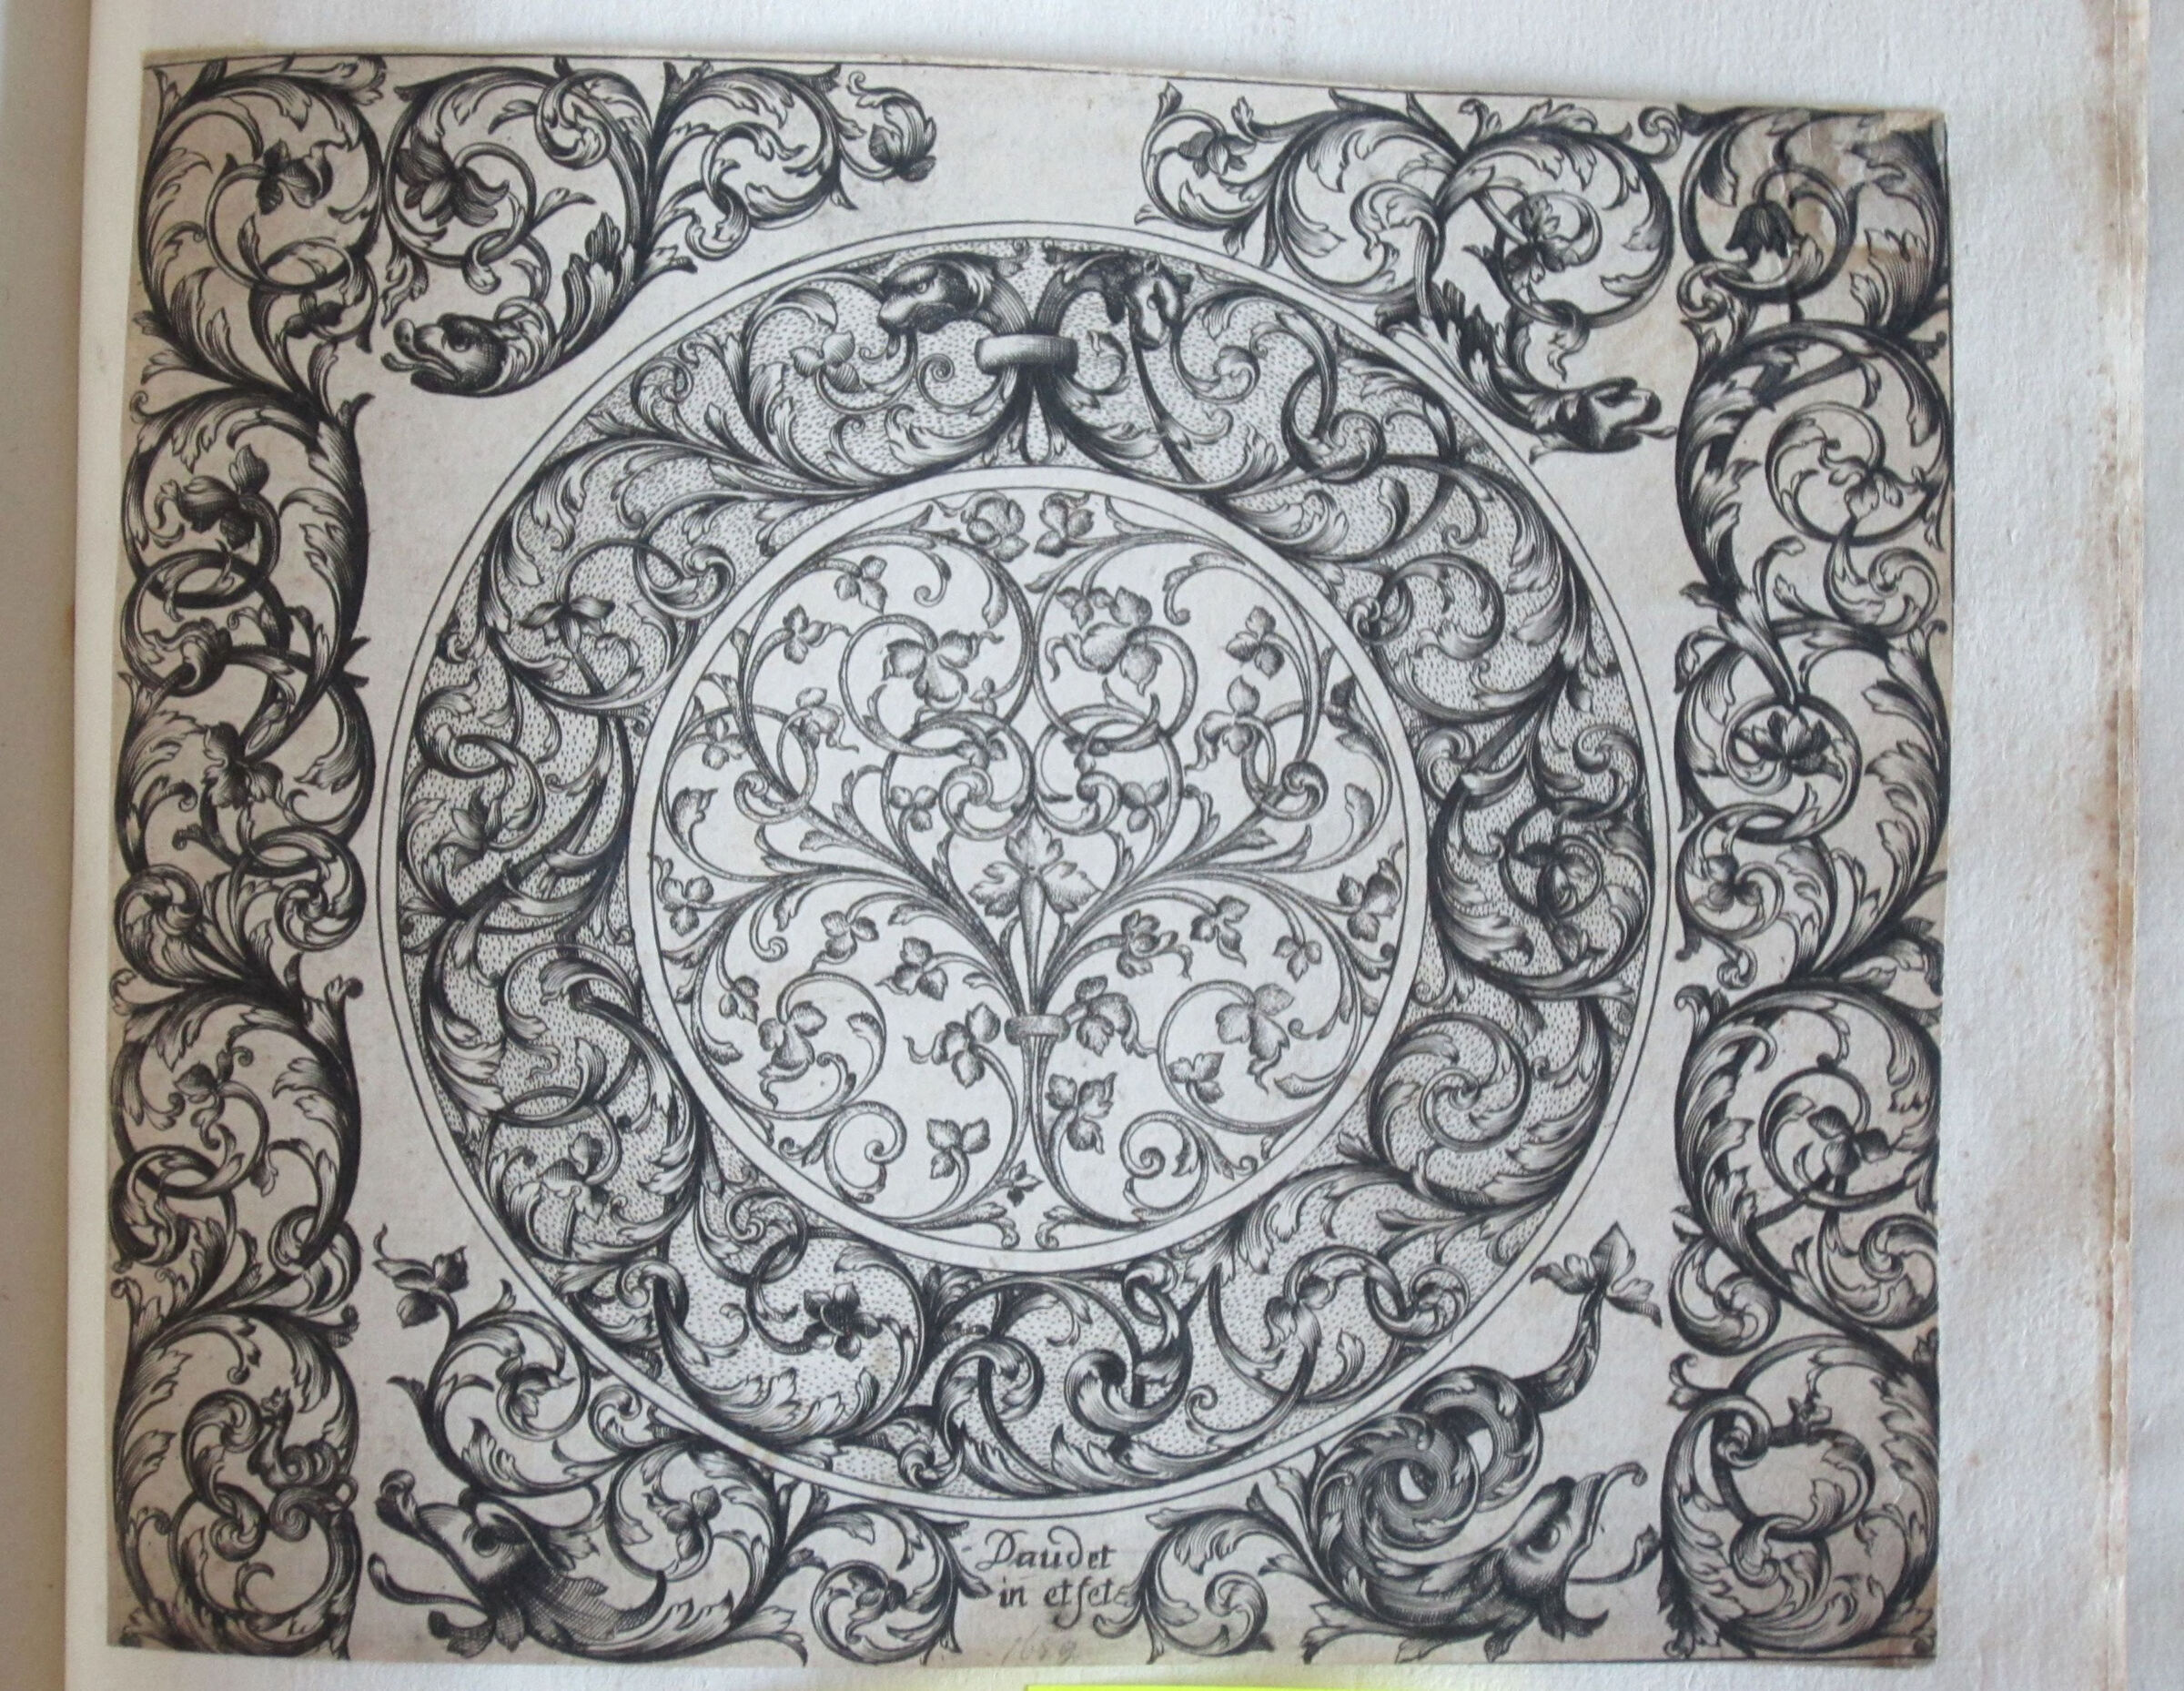 Foliate Moresques Centered By A Large Circular Motif With A Border With A Stippled Background